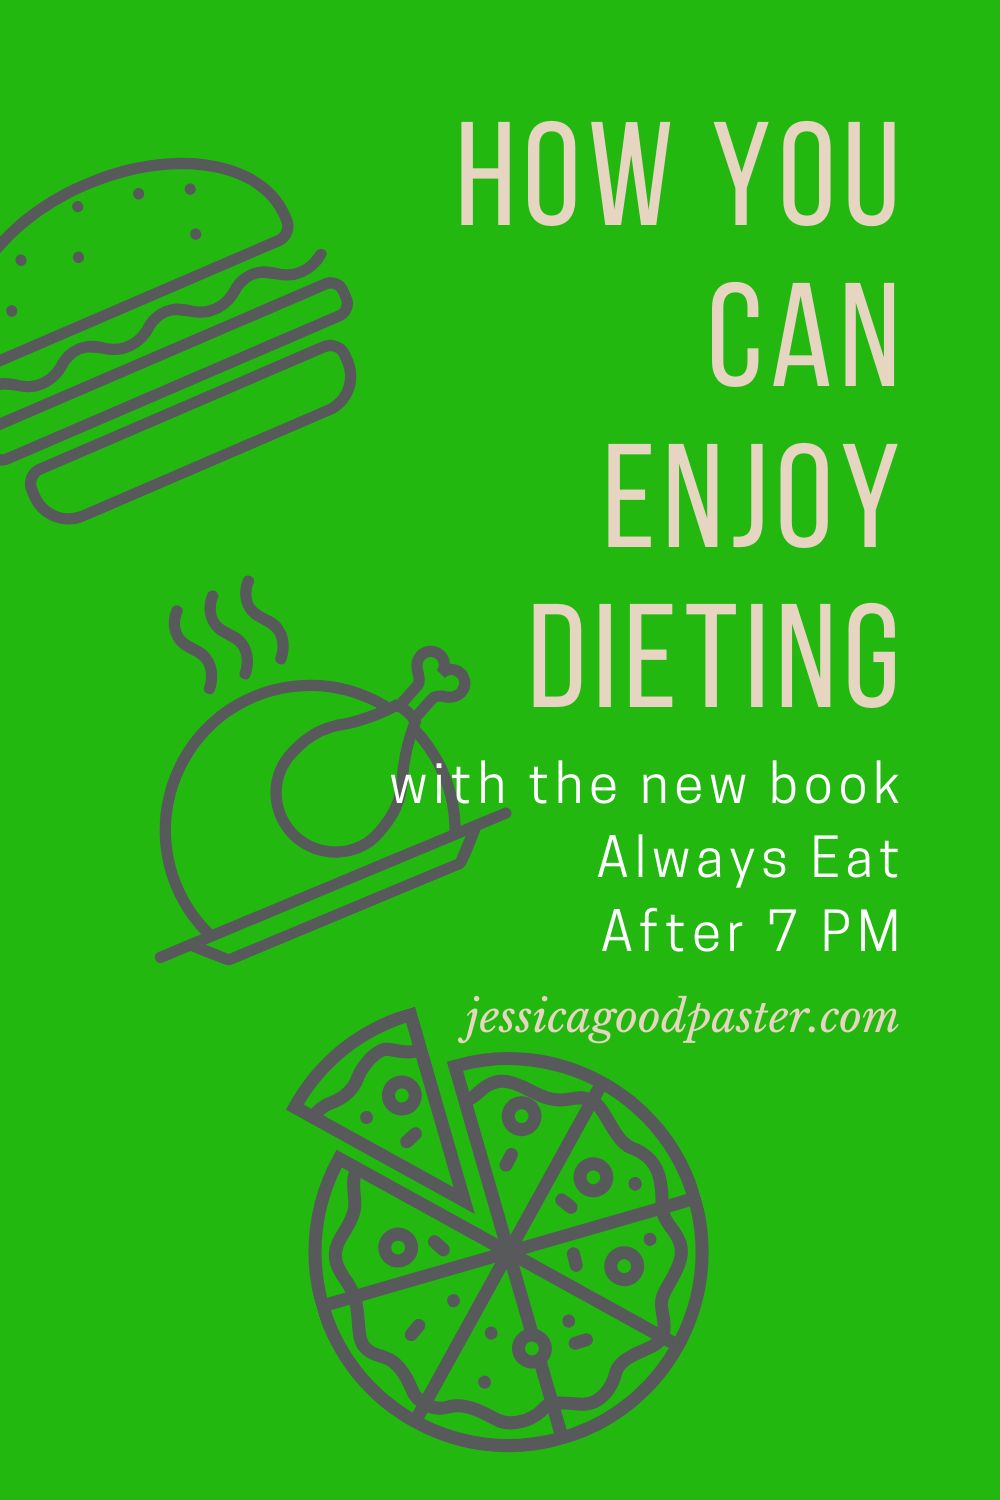 How You Can Enjoy Dieting with Always Eat After 7 PM | Are you always hungry and miserable when you try to lose weight? It doesn't have to be that way! Check out Joel Marion's new book Always Eat After 7 PM to learn how. #diet #diettips #AlwaysEatBook #eathealthy